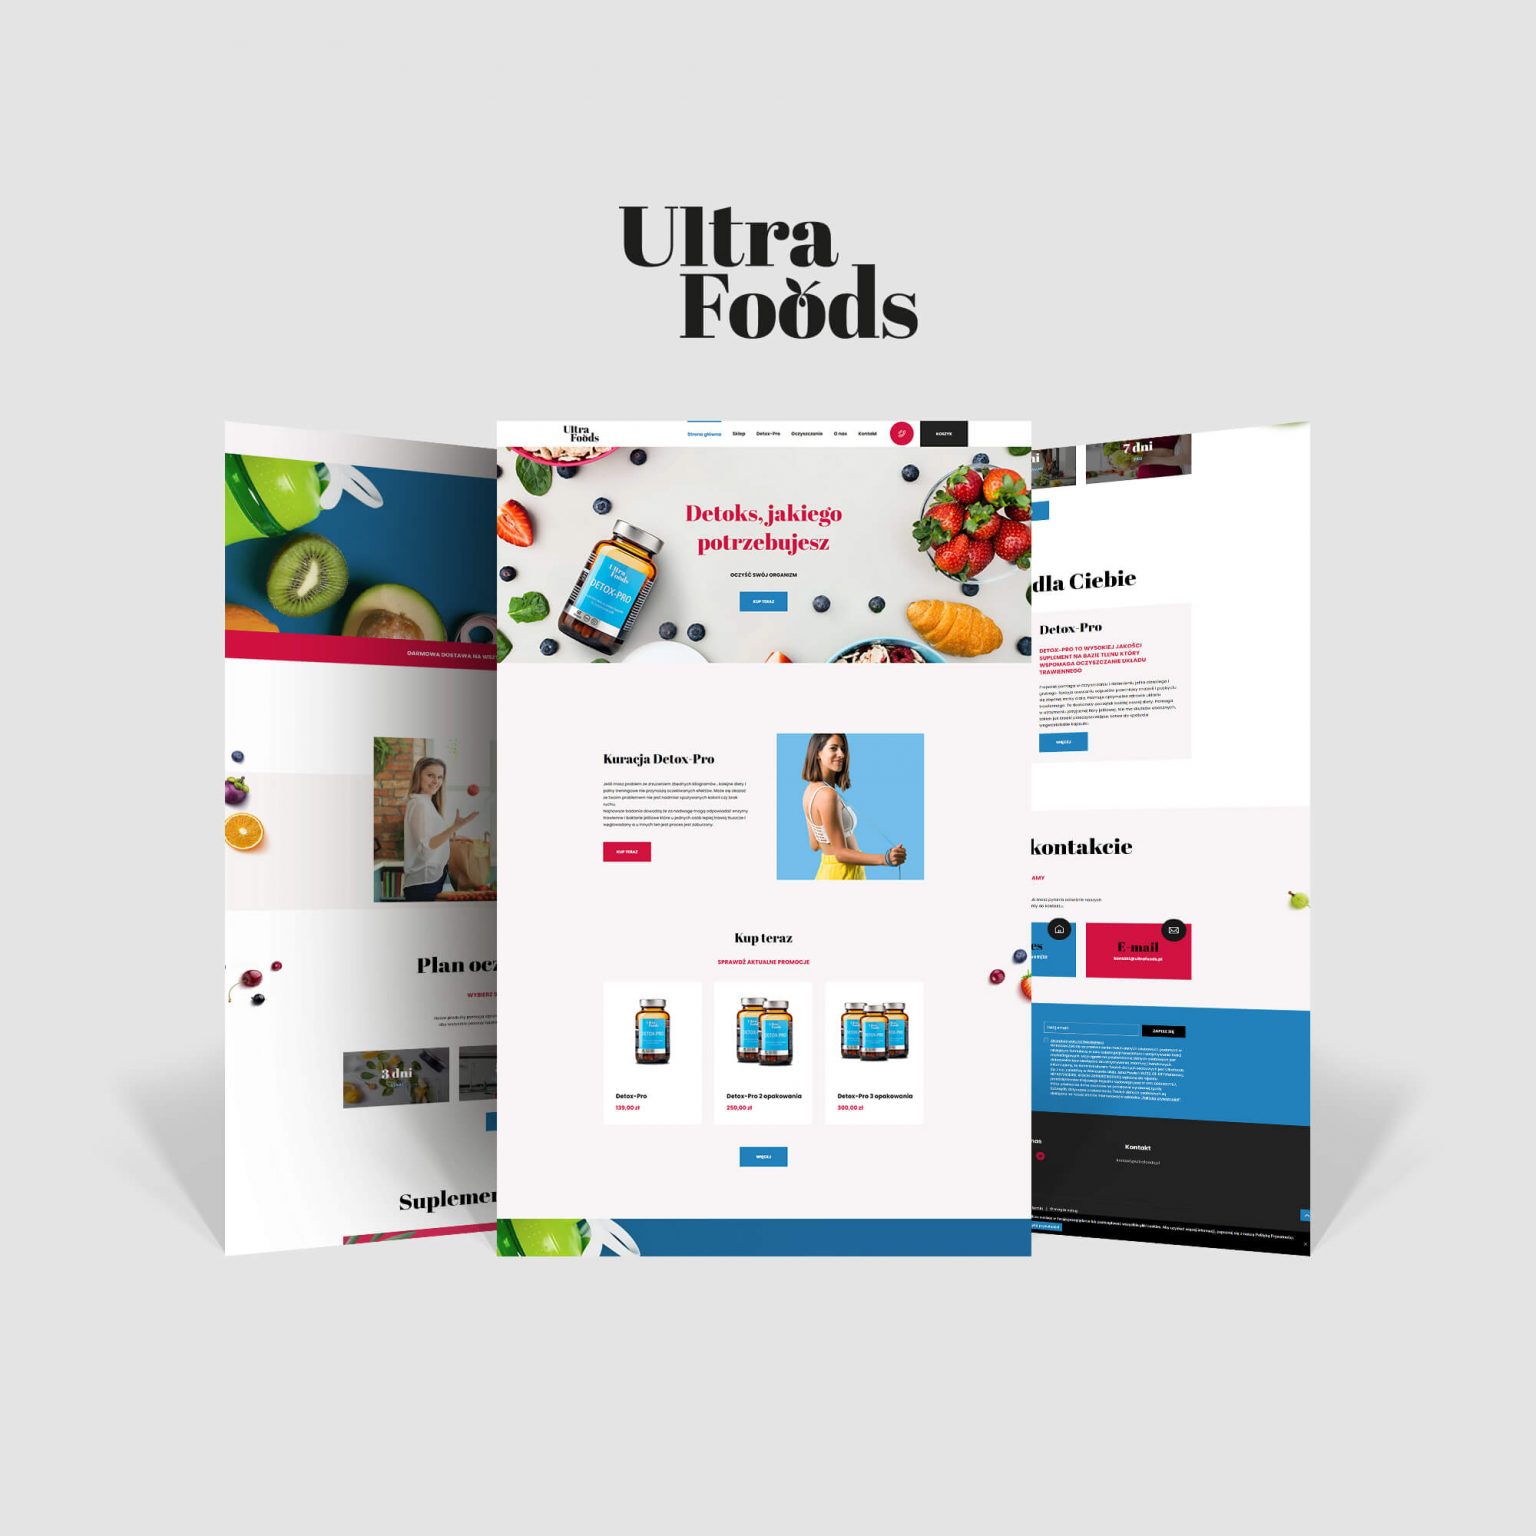 Ultrafoods - image